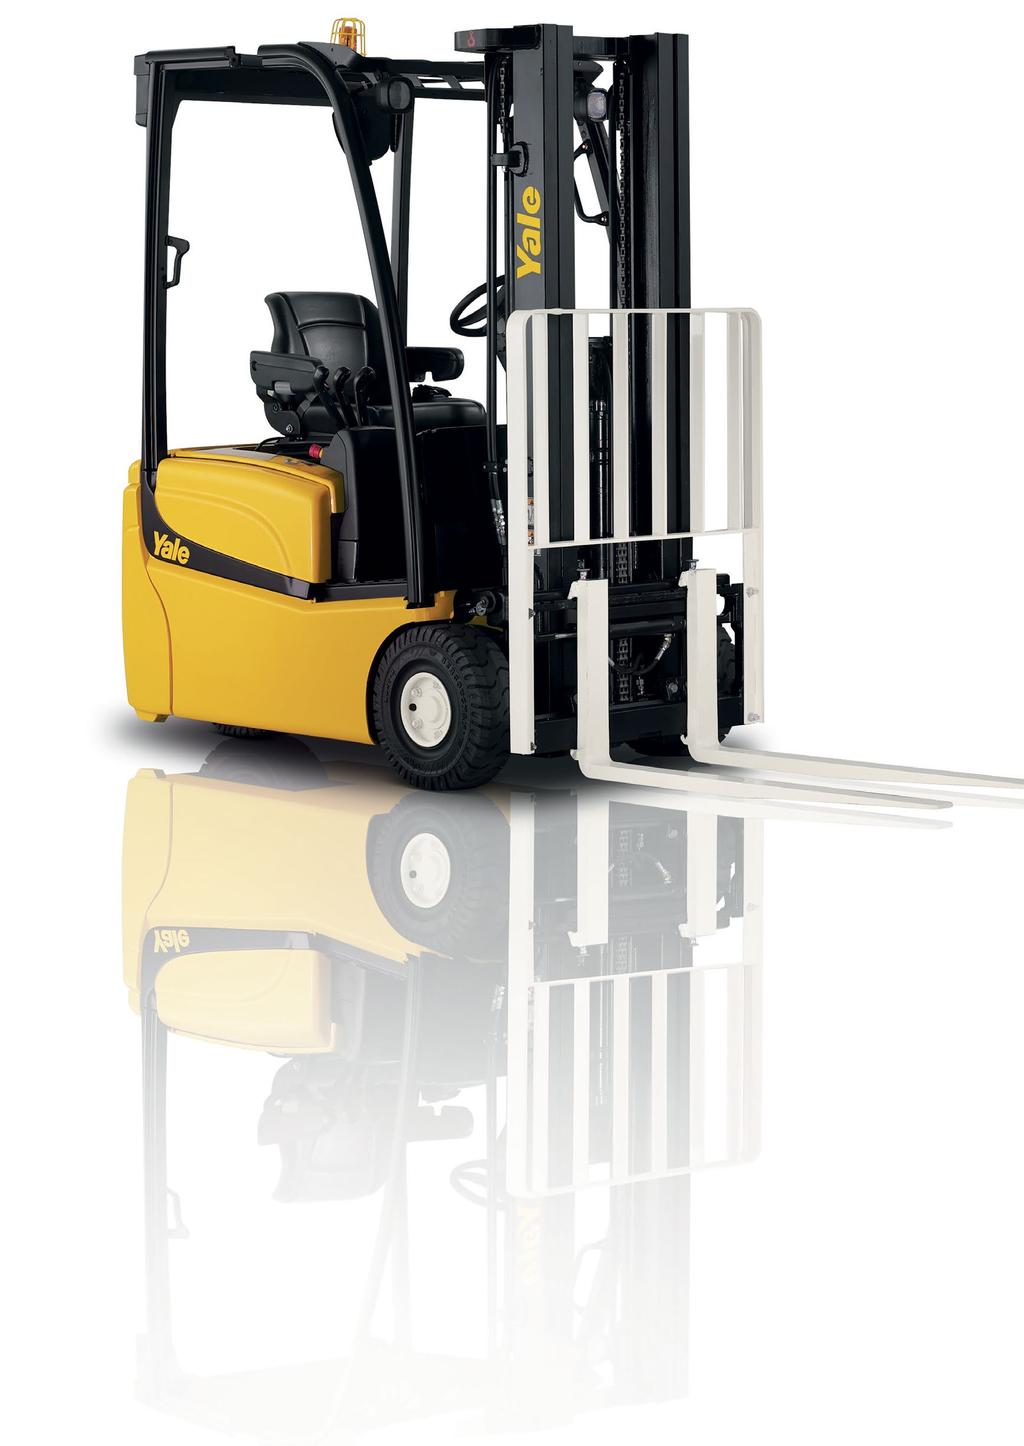 Low cost of ownership. When it comes to the overall cost of a forklift truck to your business, the initial purchase price can represent just one small portion.